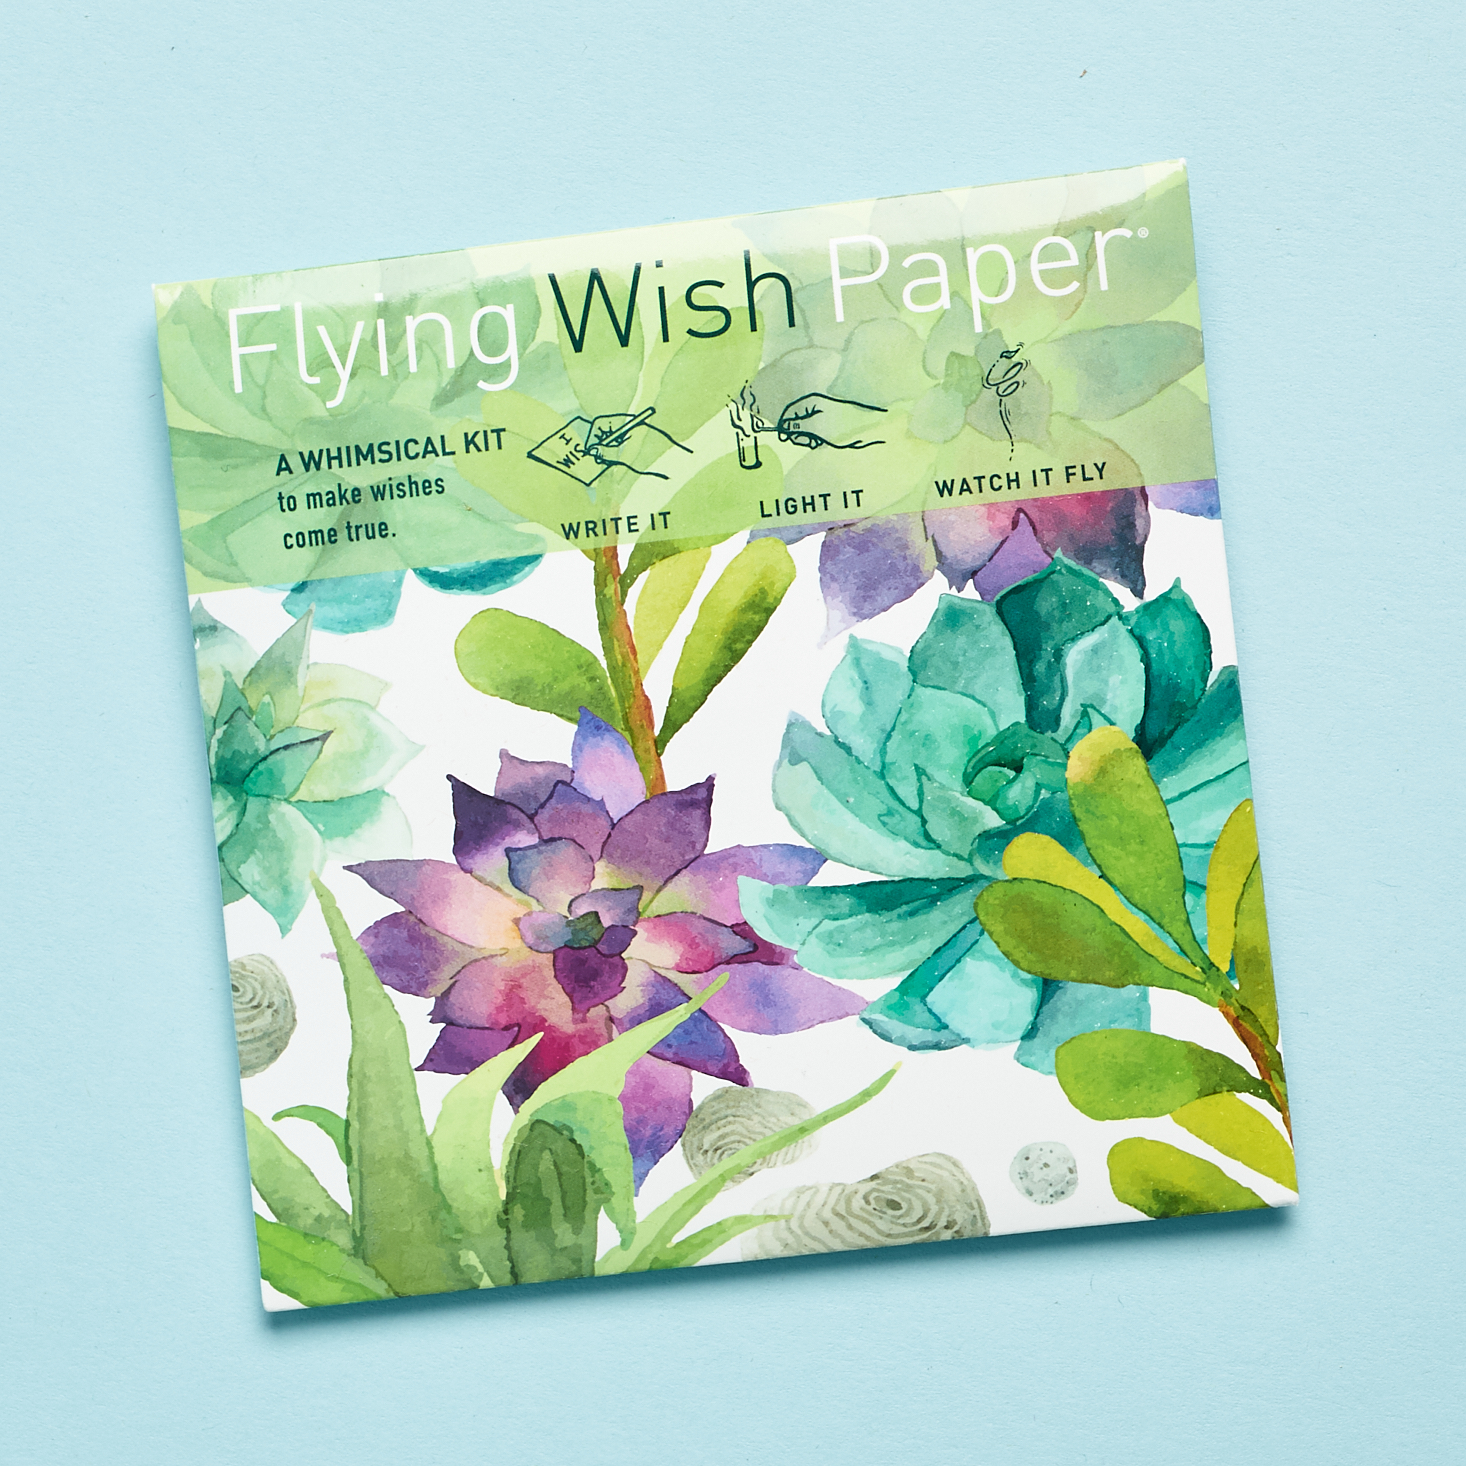 Flying Wish Paper